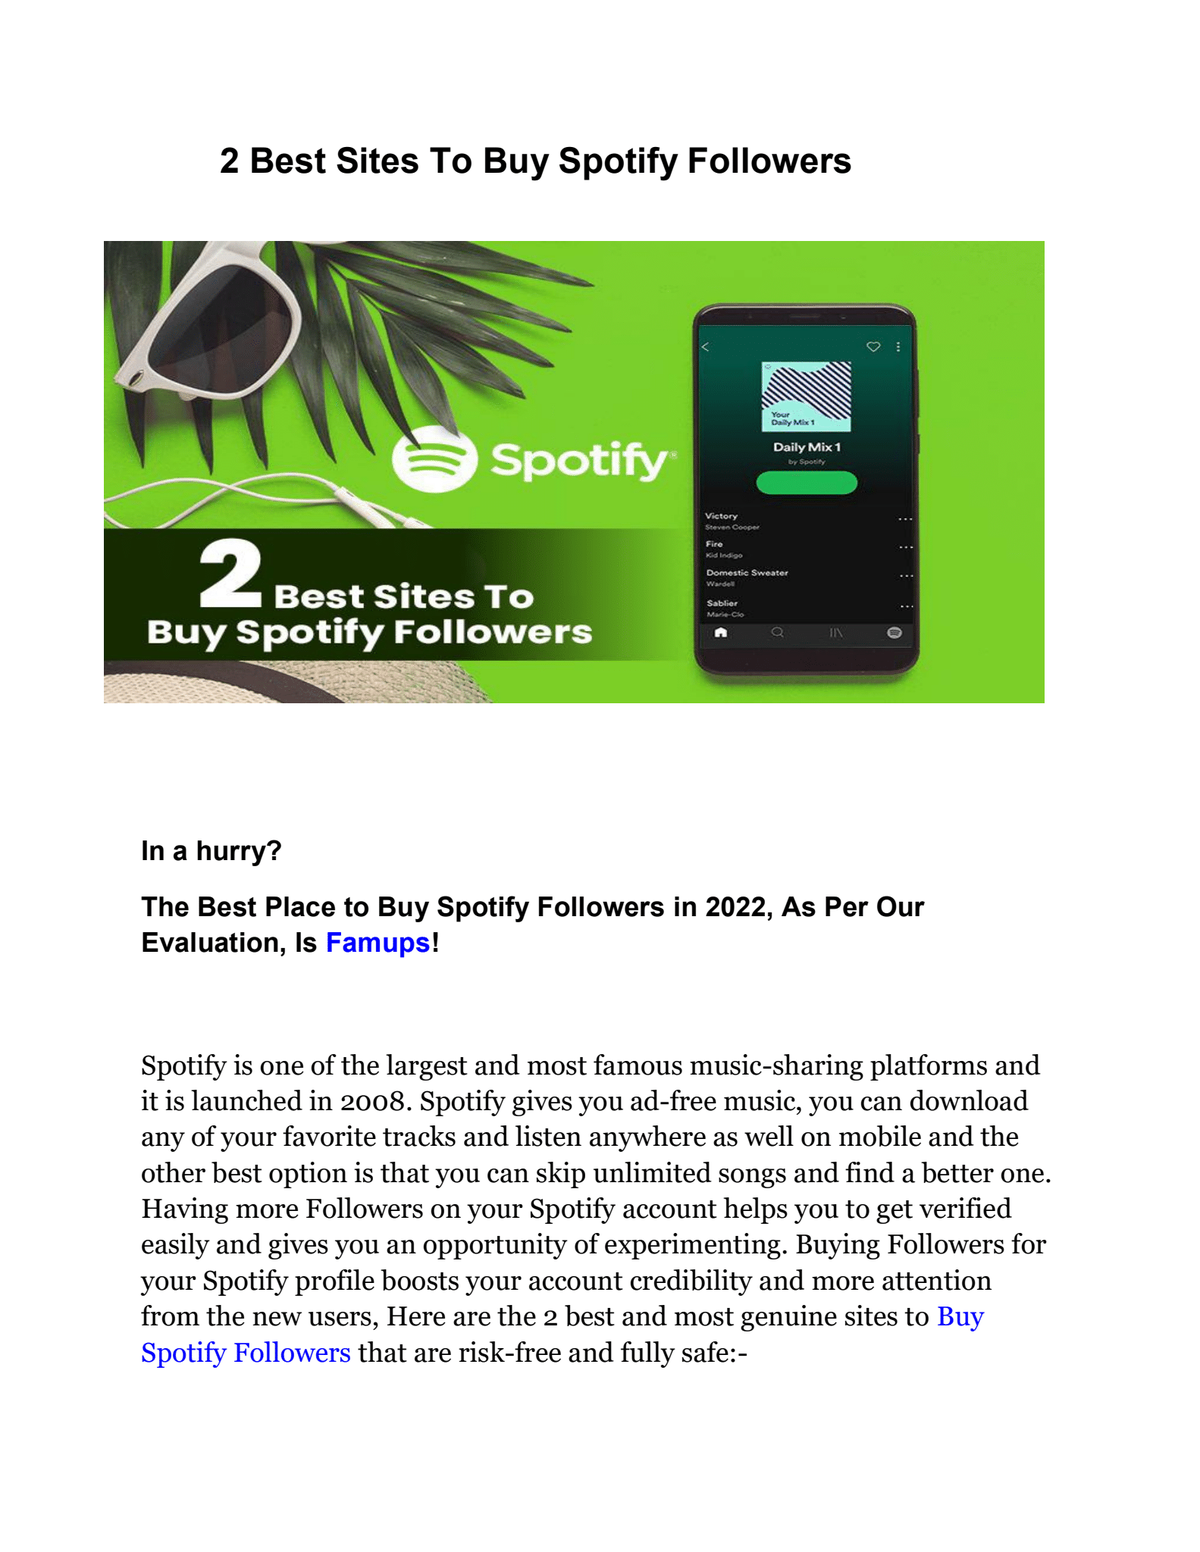  2 Best Sites To Buy Spotify Followers